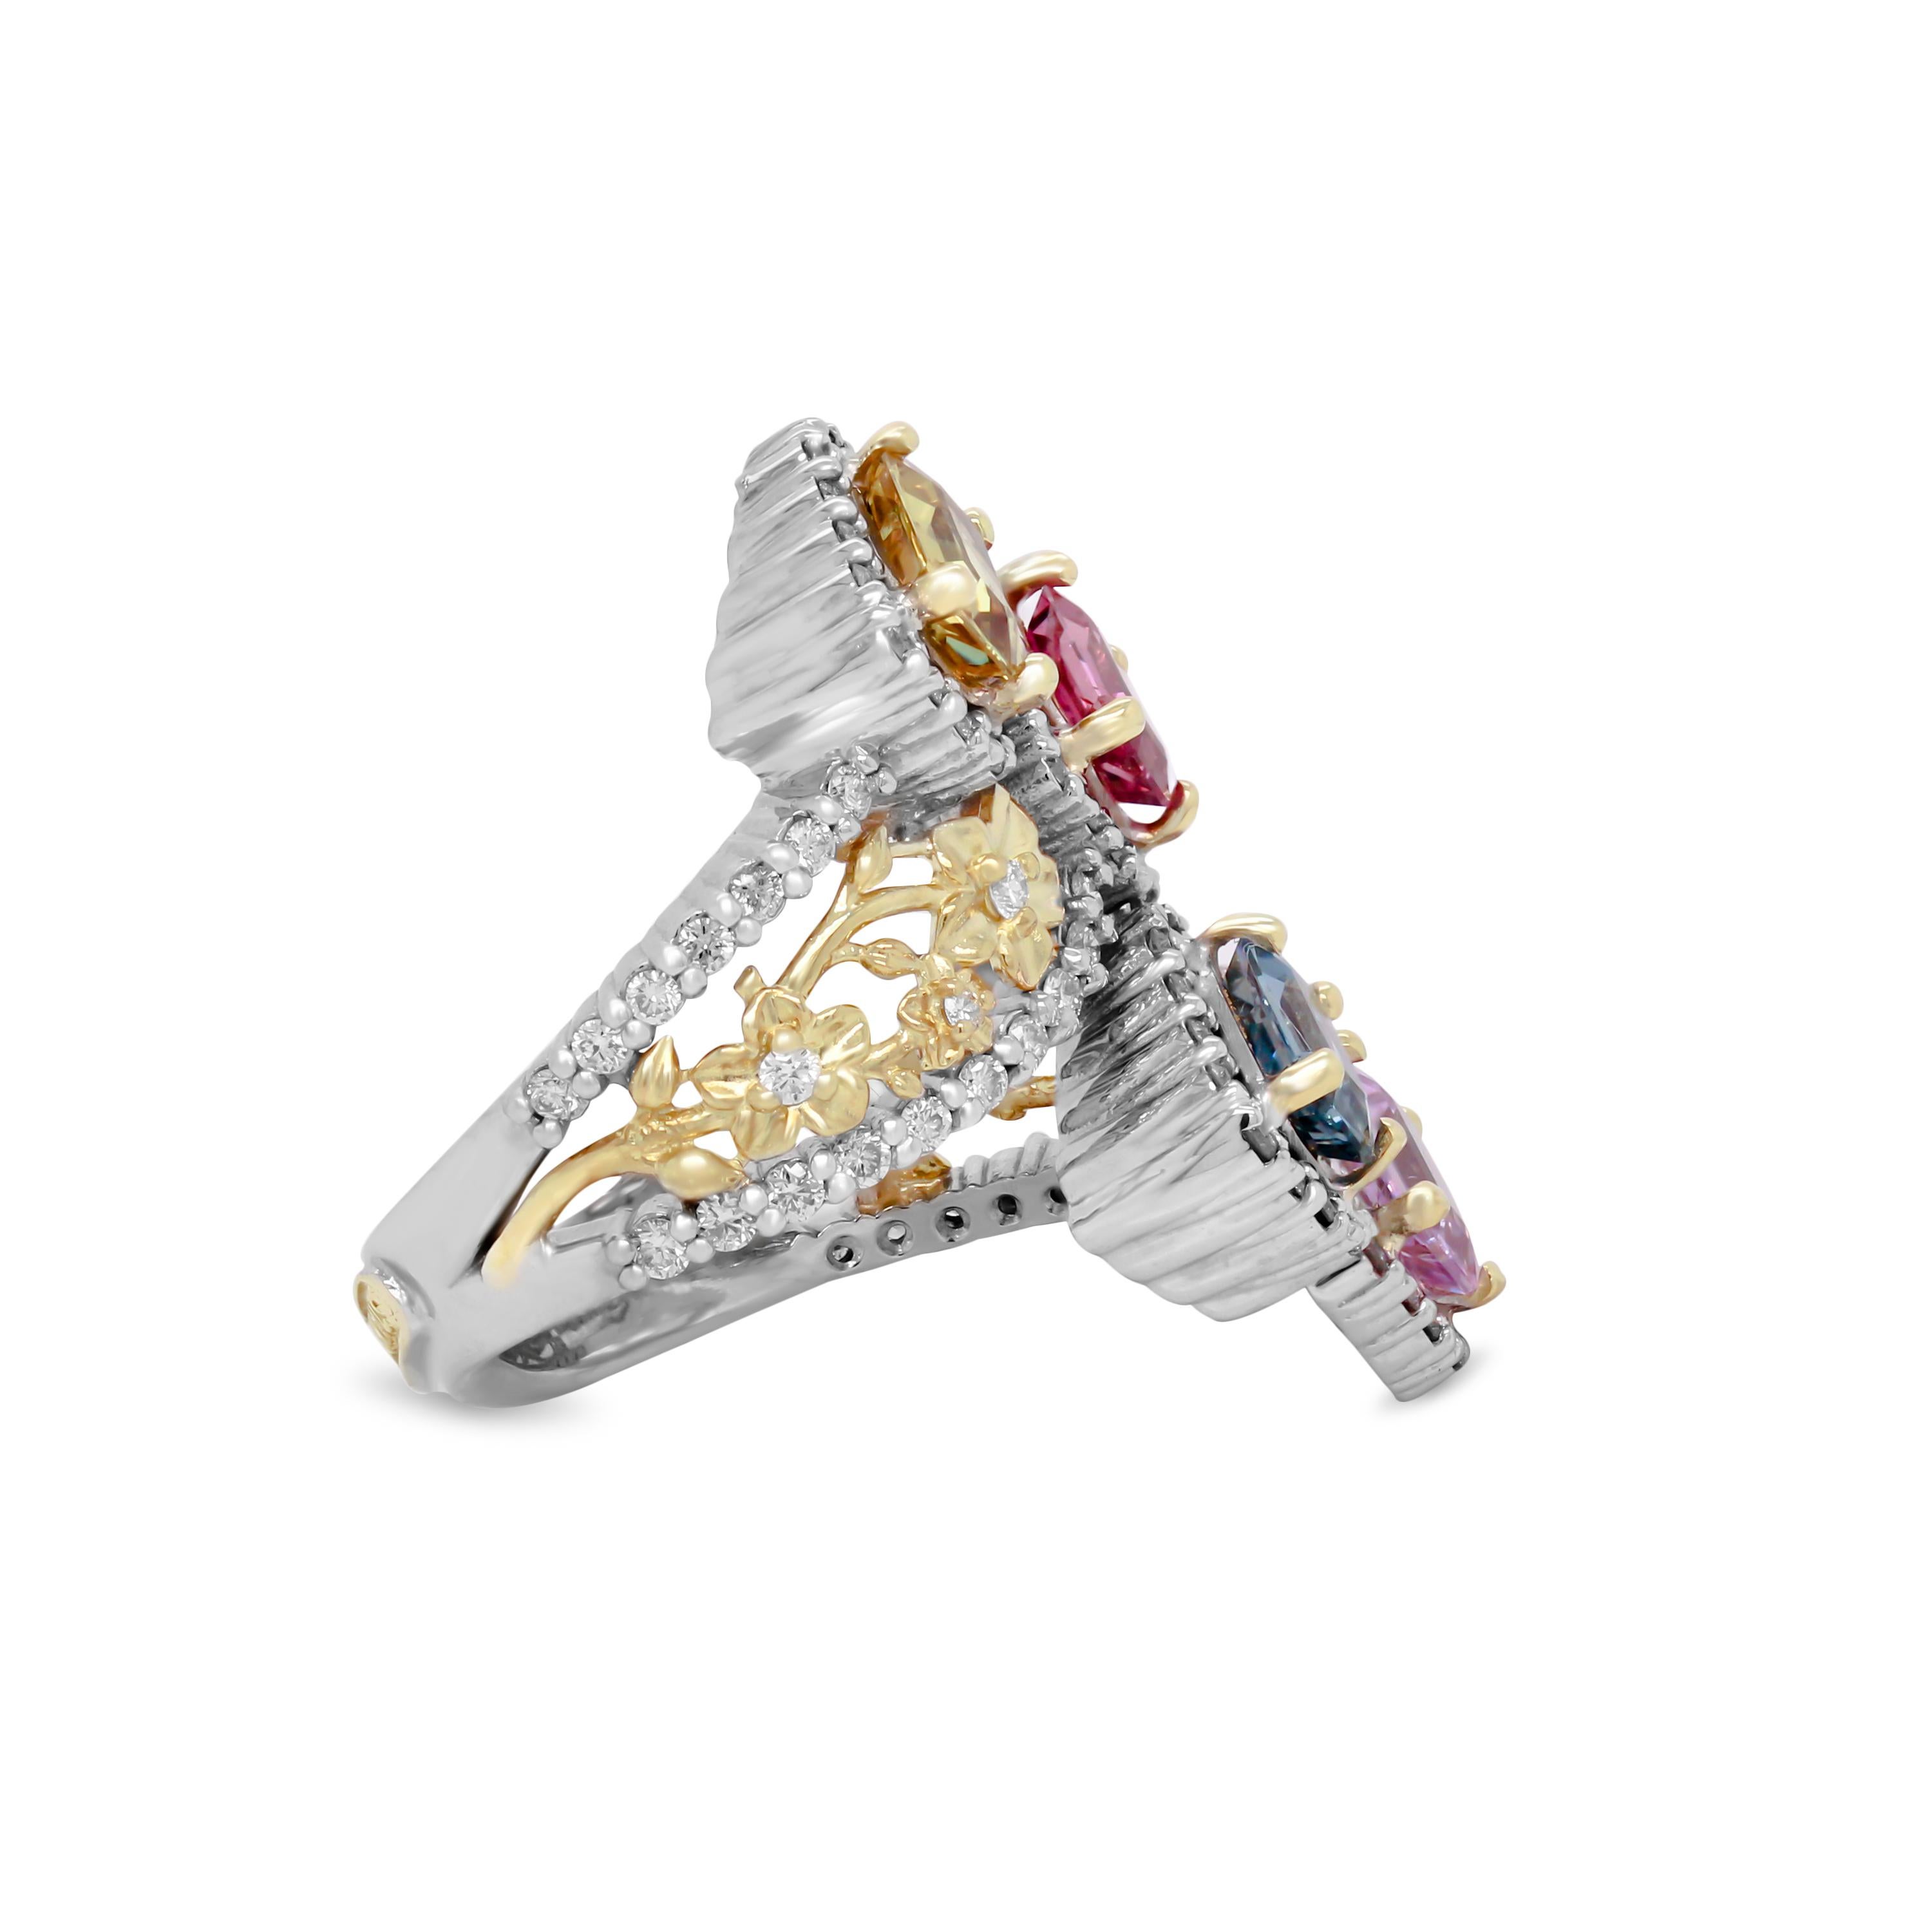 Stambolian 18K Yellow White Gold Floral Diamonds Emerald Cut Sapphires Ring

This one-of-a-kind bypass ring features an incredible floral design on both sides of the band with diamonds set on both edges. The center of the ring features four,